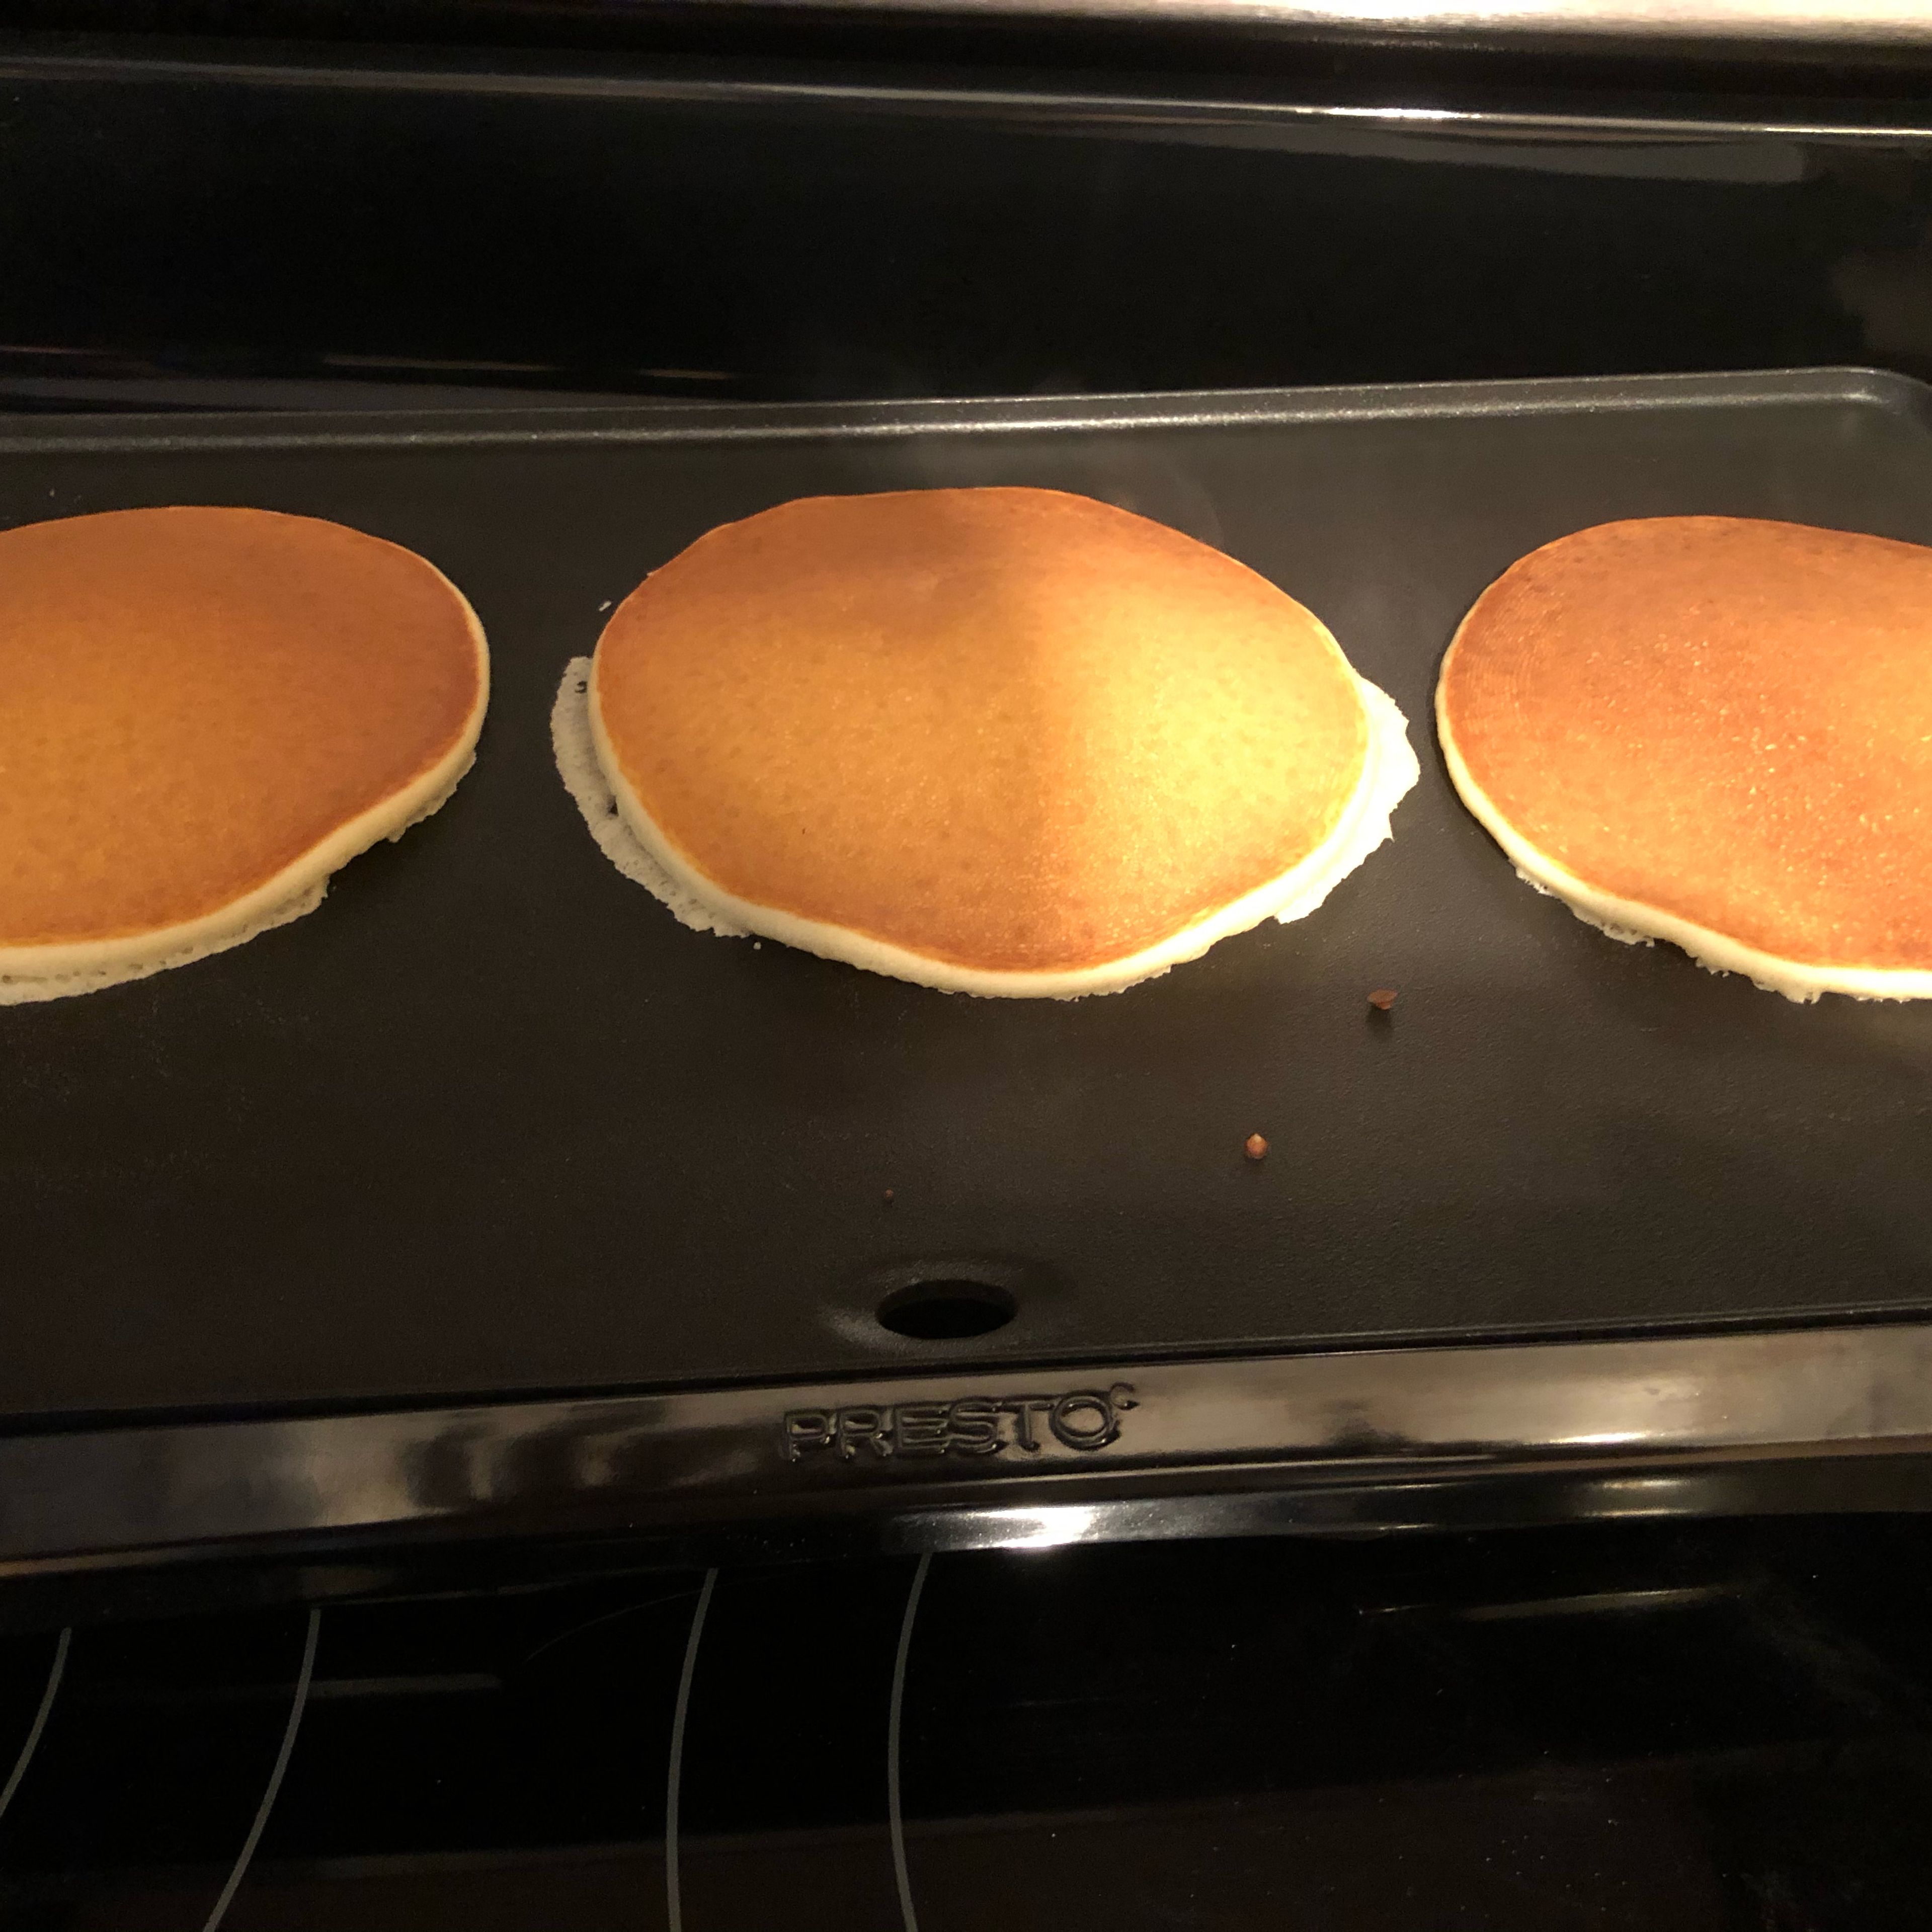 Cooking on the griddle for 2-3 minutes for each side depends how big is the pancake